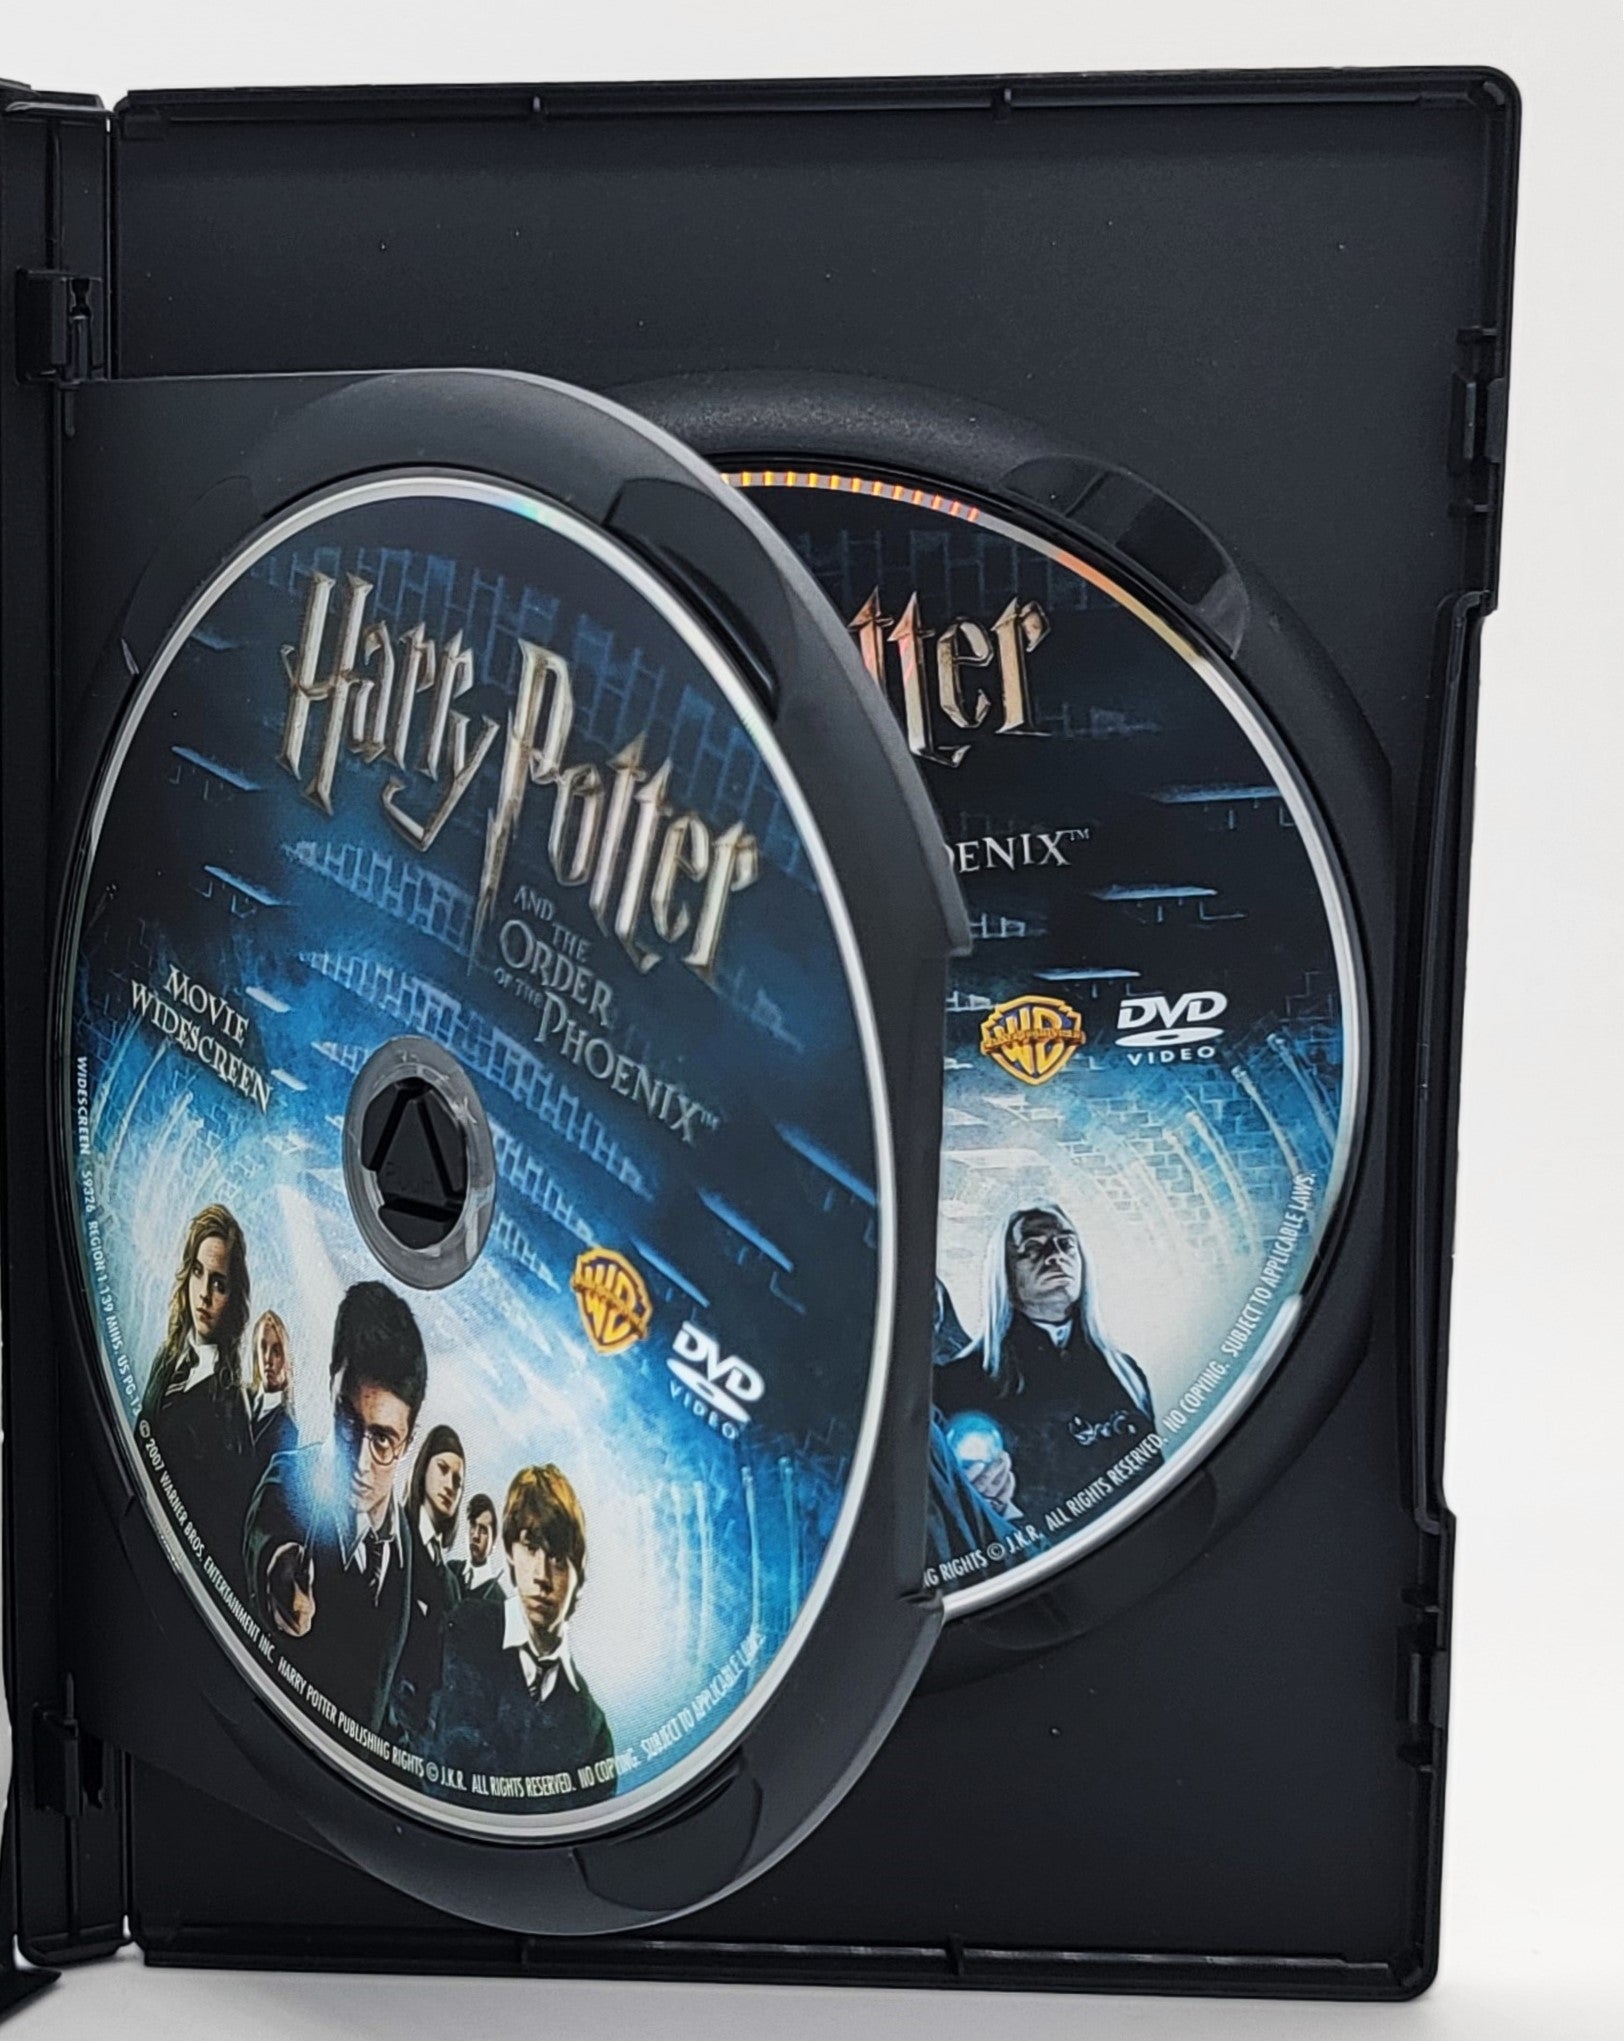 Warner Brother - Harry Potter and the Order of the Phoenix | DVD | 2 Disc Special Edition - DVD - Steady Bunny Shop